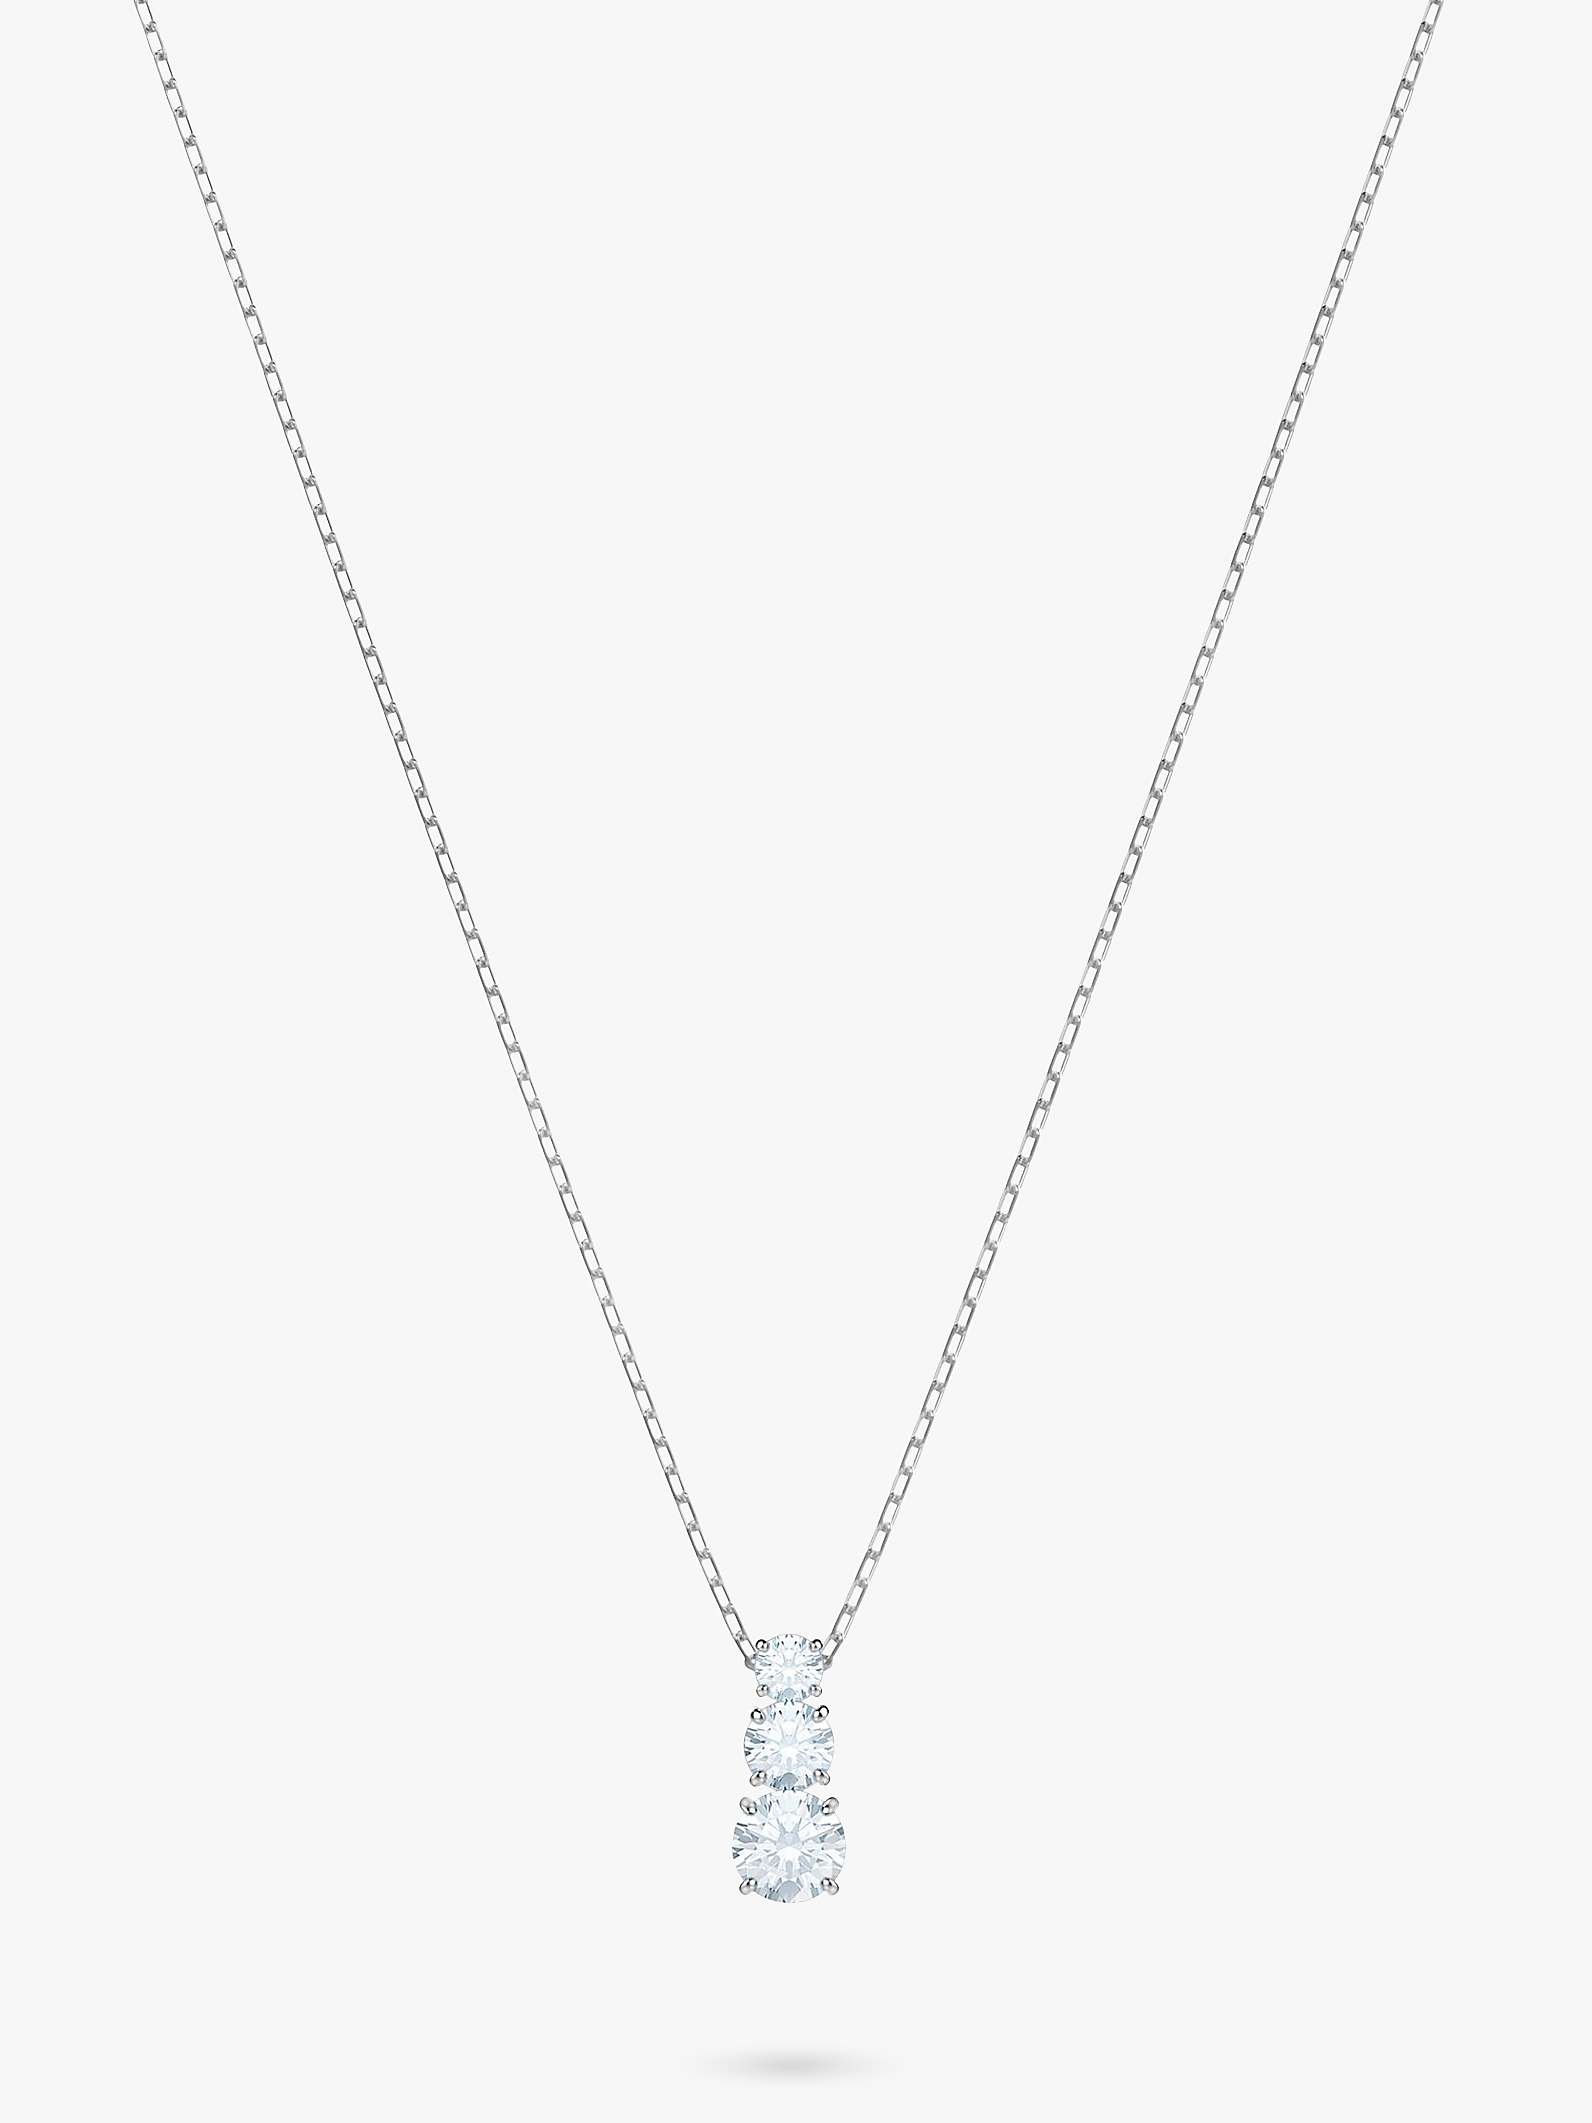 Buy Swarovski Attract Triple Crystal Pendant Necklace, Silver/Clear Online at johnlewis.com